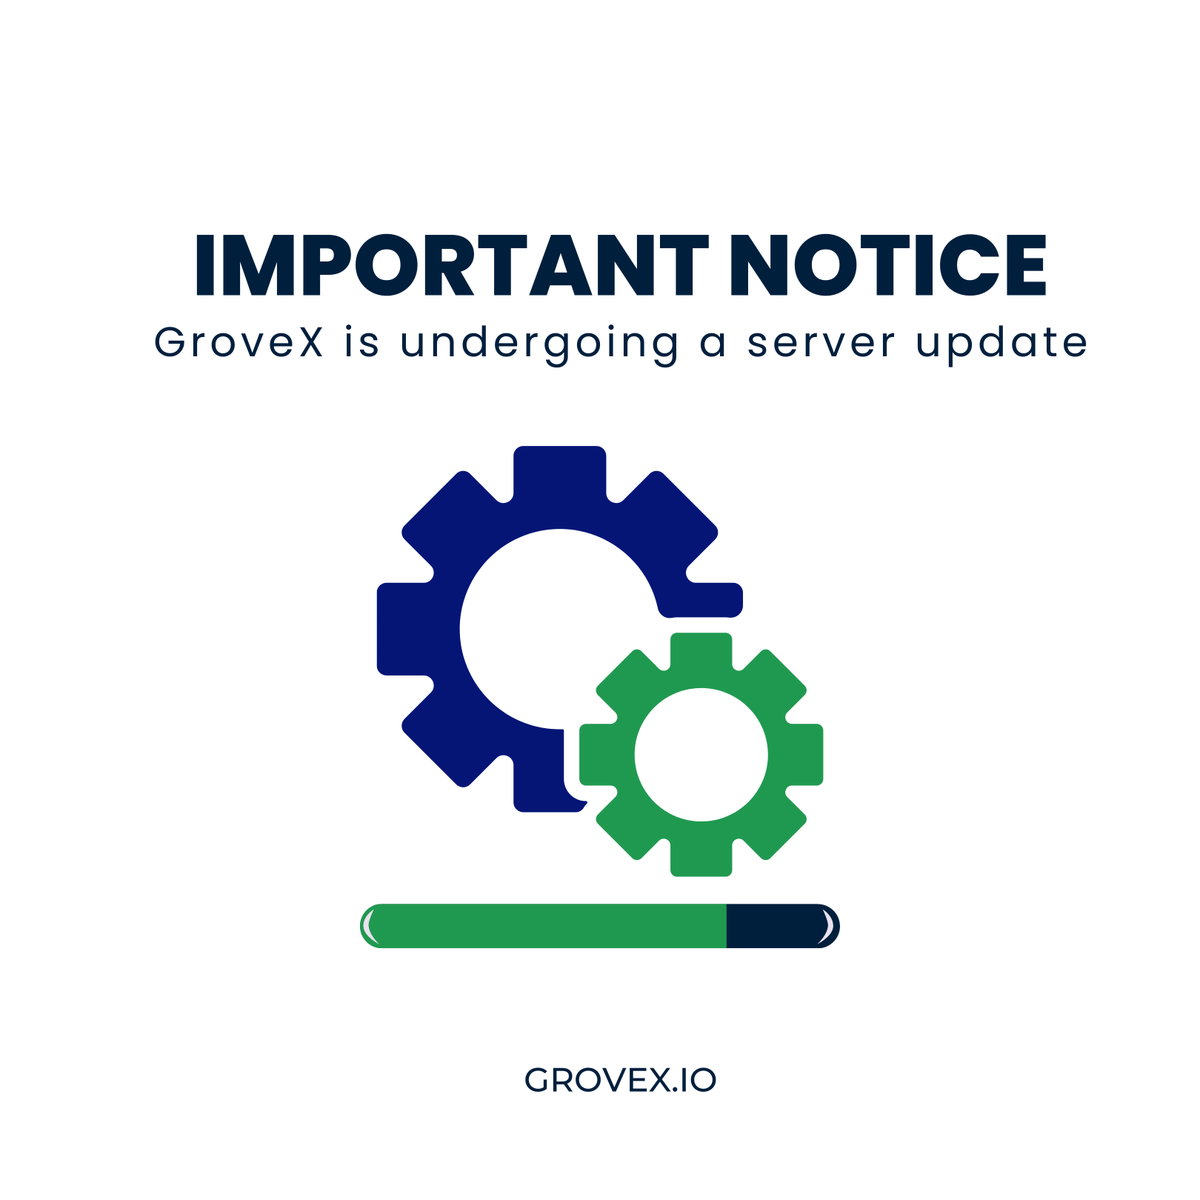 🚨 System Update Alert 🚨 We are conducting a system update to enhance security and performance. Here are the key details: Start Time: NOW, May 1 at 11 PM AEST (1 PM UTC, 9 AM EST) End Time: May 2 at 12 AM AEST (2 PM UTC, 10 AM EST) During the update, trading and withdrawals…